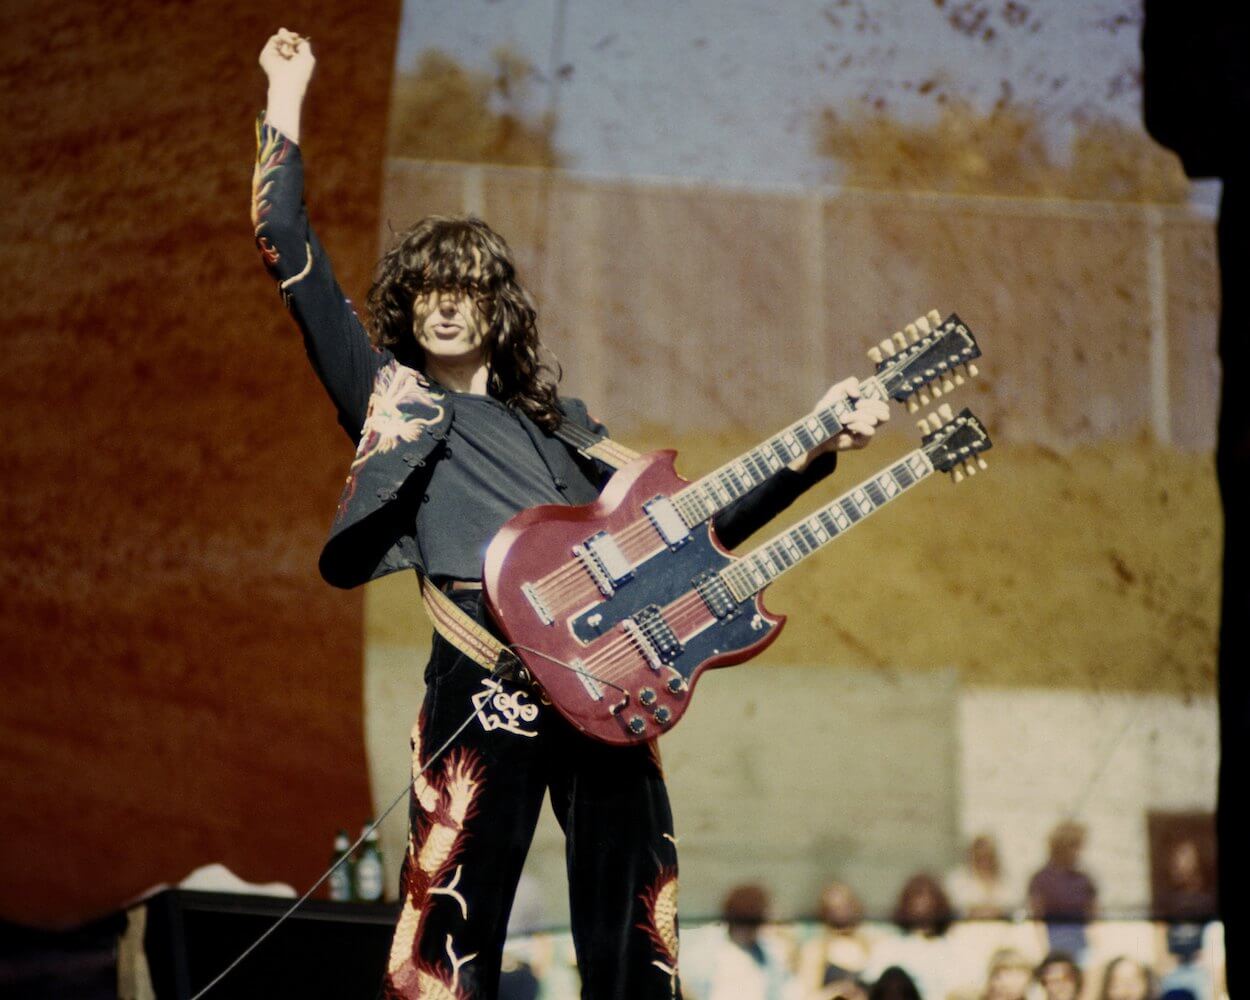 Jimmy Page wears his black suit with red dragons while playing double-necked guitar at a 1977 concert in Oakland, California.